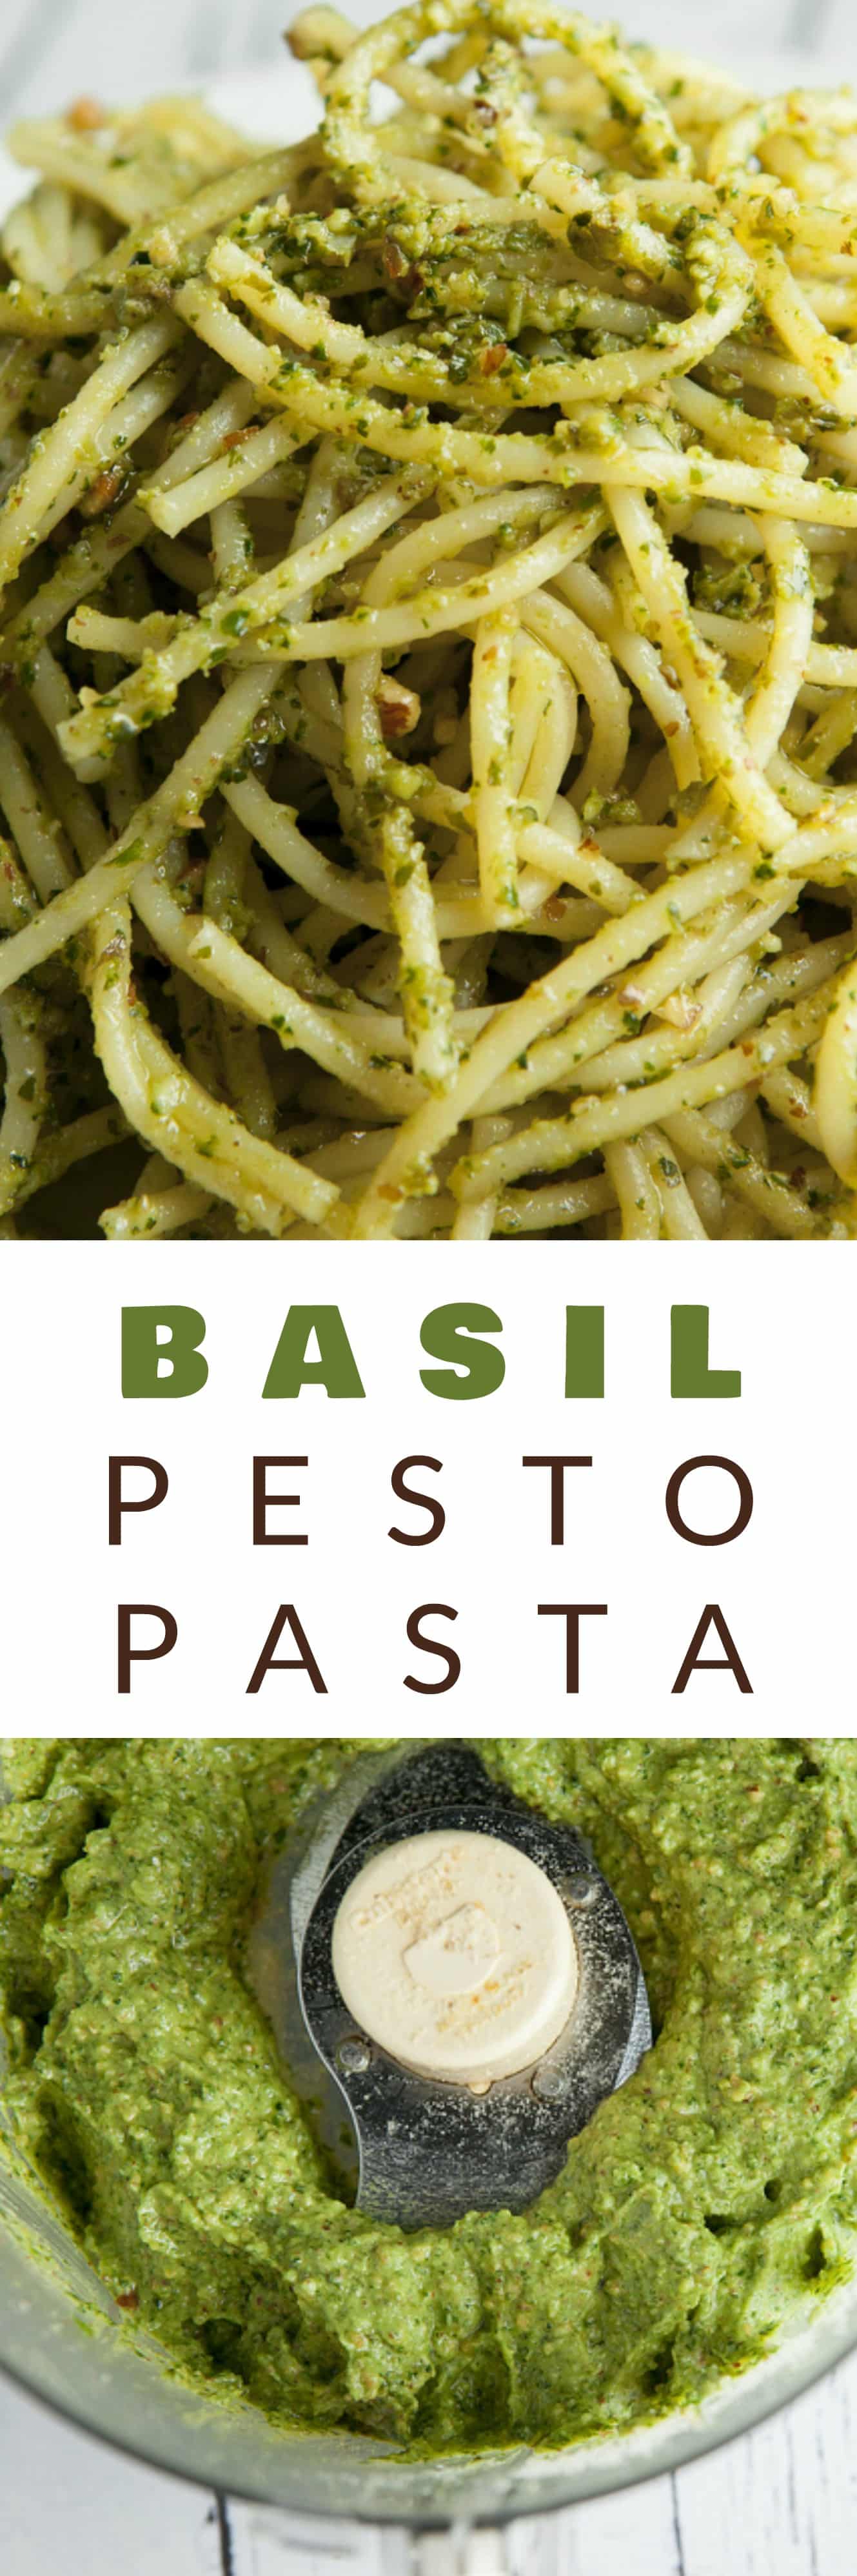 BUDGET FRIENDLY Basil Pesto Pasta recipe made with fresh basil and almonds! This easy, healthy homemade recipe makes delicious basil pesto that can be served over pasta, as appetizers or on a sandwich! Pine nuts are expensive so this is a much more budget friendly pesto.